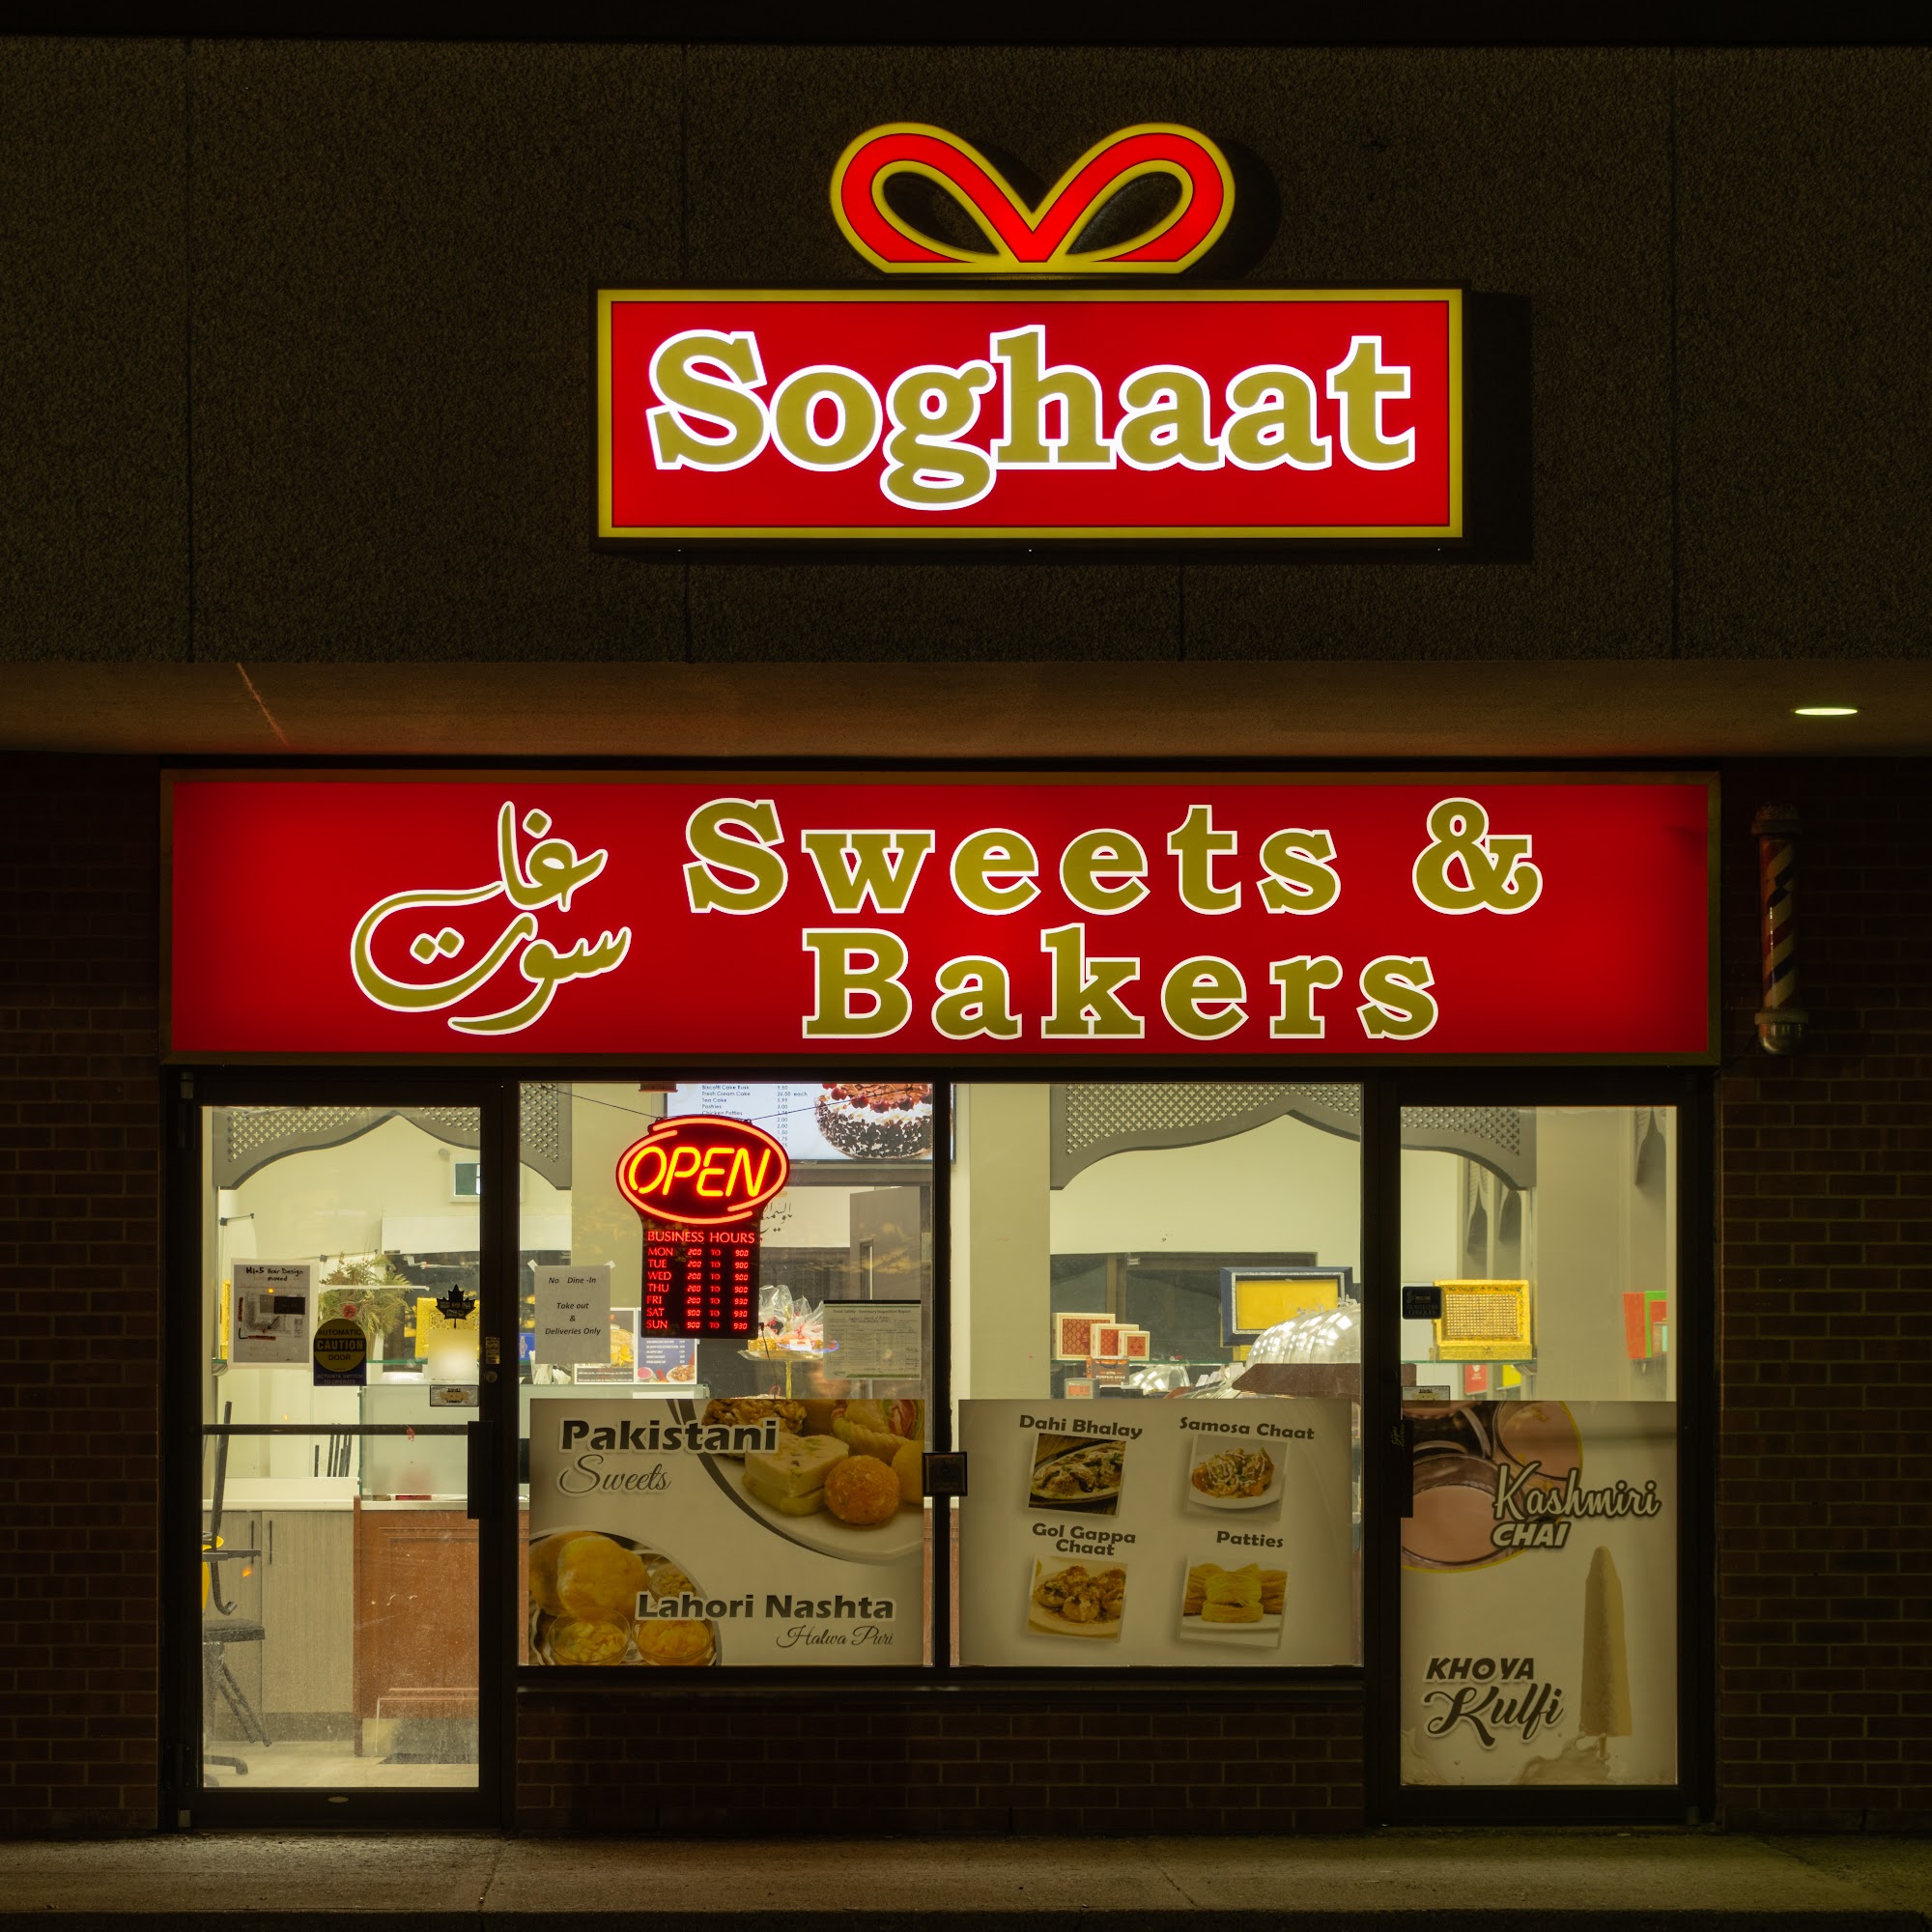 Soghaat Sweets and Bakers